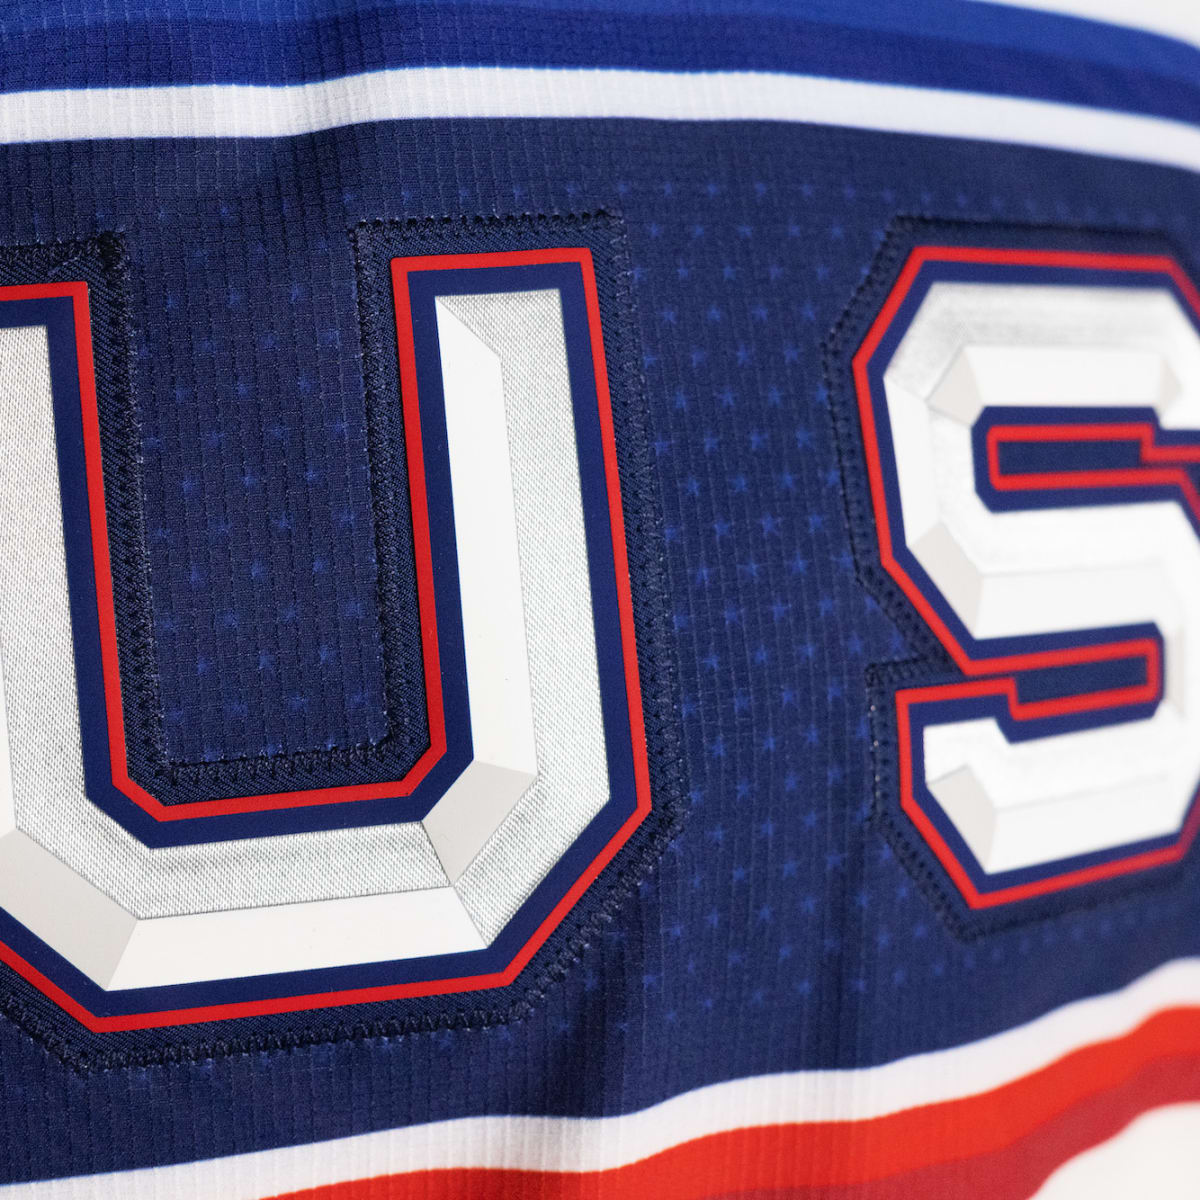 Pass or Fail: Team USA's home and away Olympic jerseys